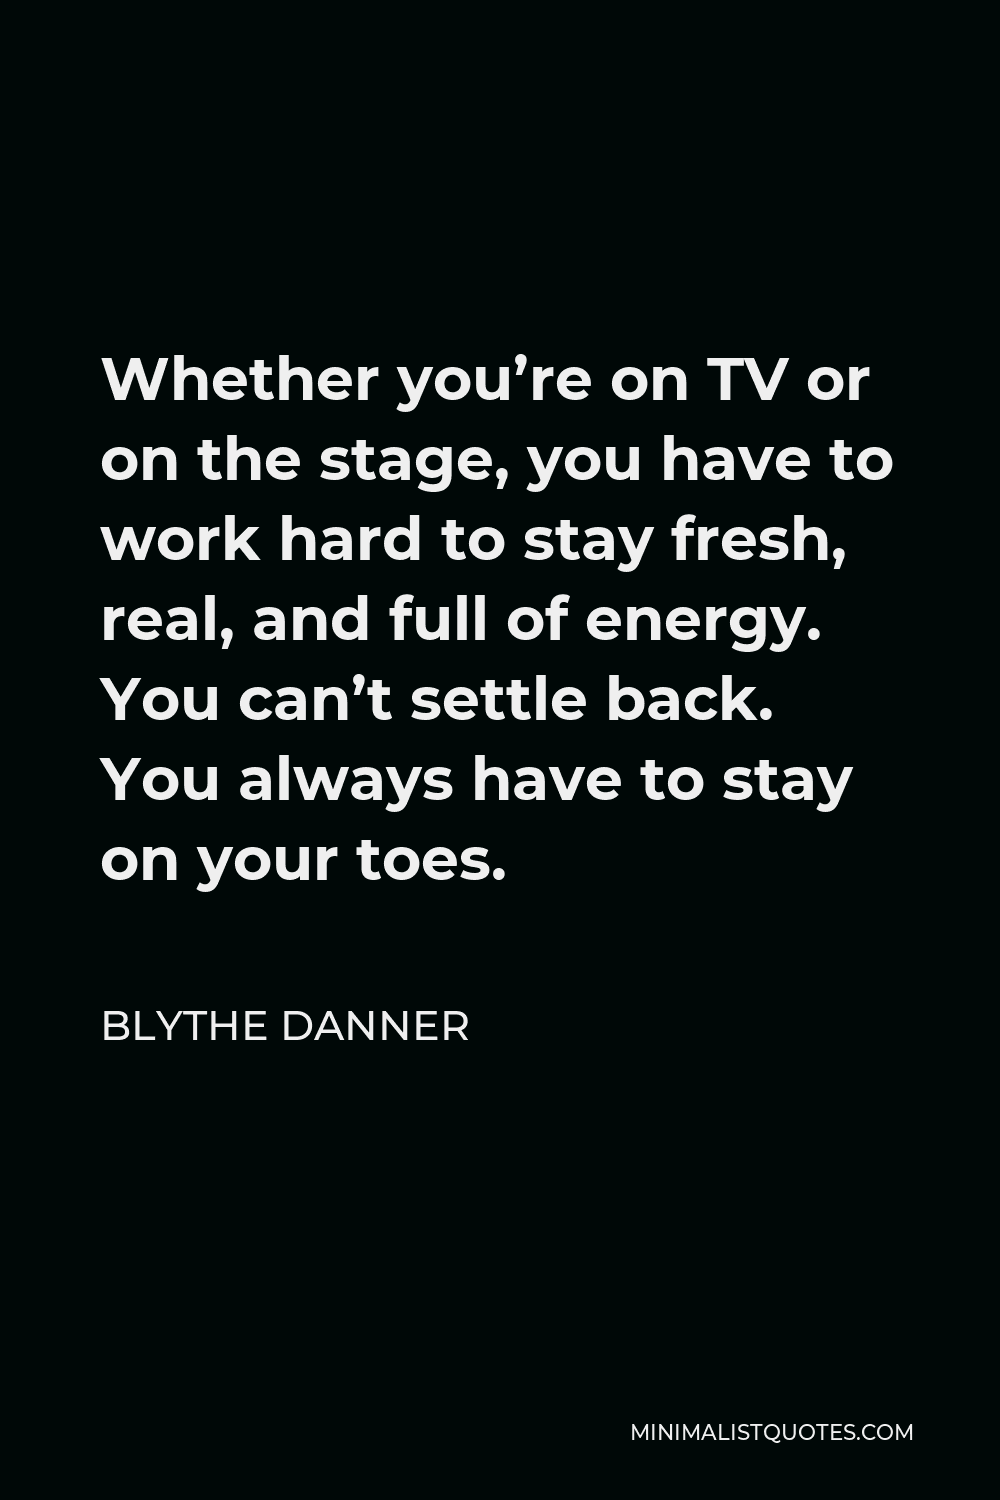 Blythe Danner Quote - Whether you’re on TV or on the stage, you have to work hard to stay fresh, real, and full of energy. You can’t settle back. You always have to stay on your toes.